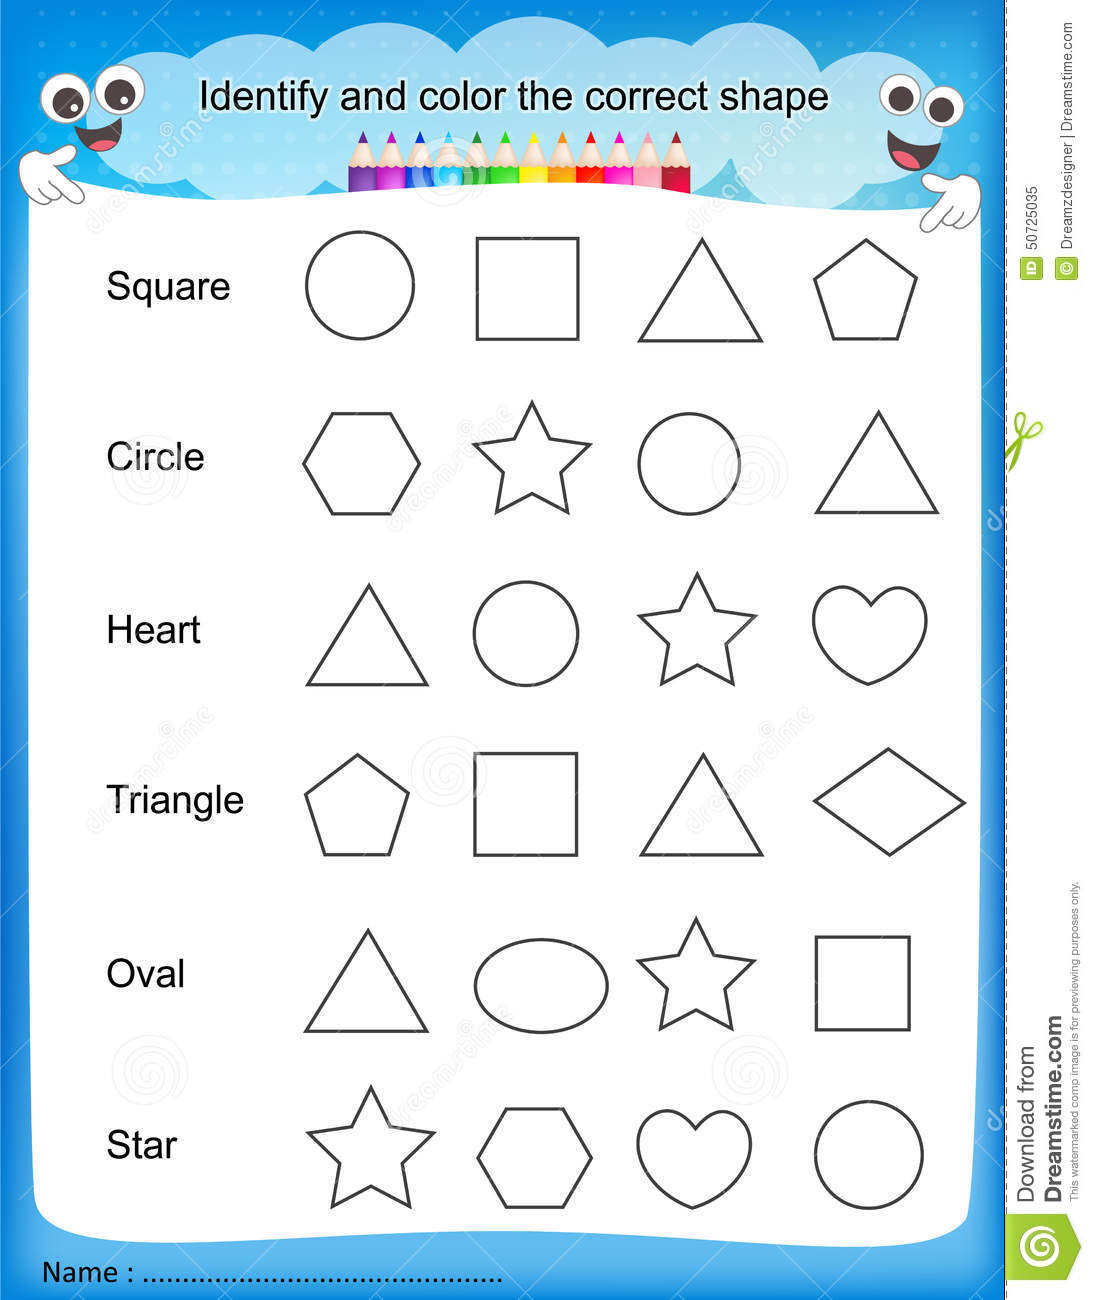 identify-and-color-the-correct-shape-worksheet-stock-vector-db-excel